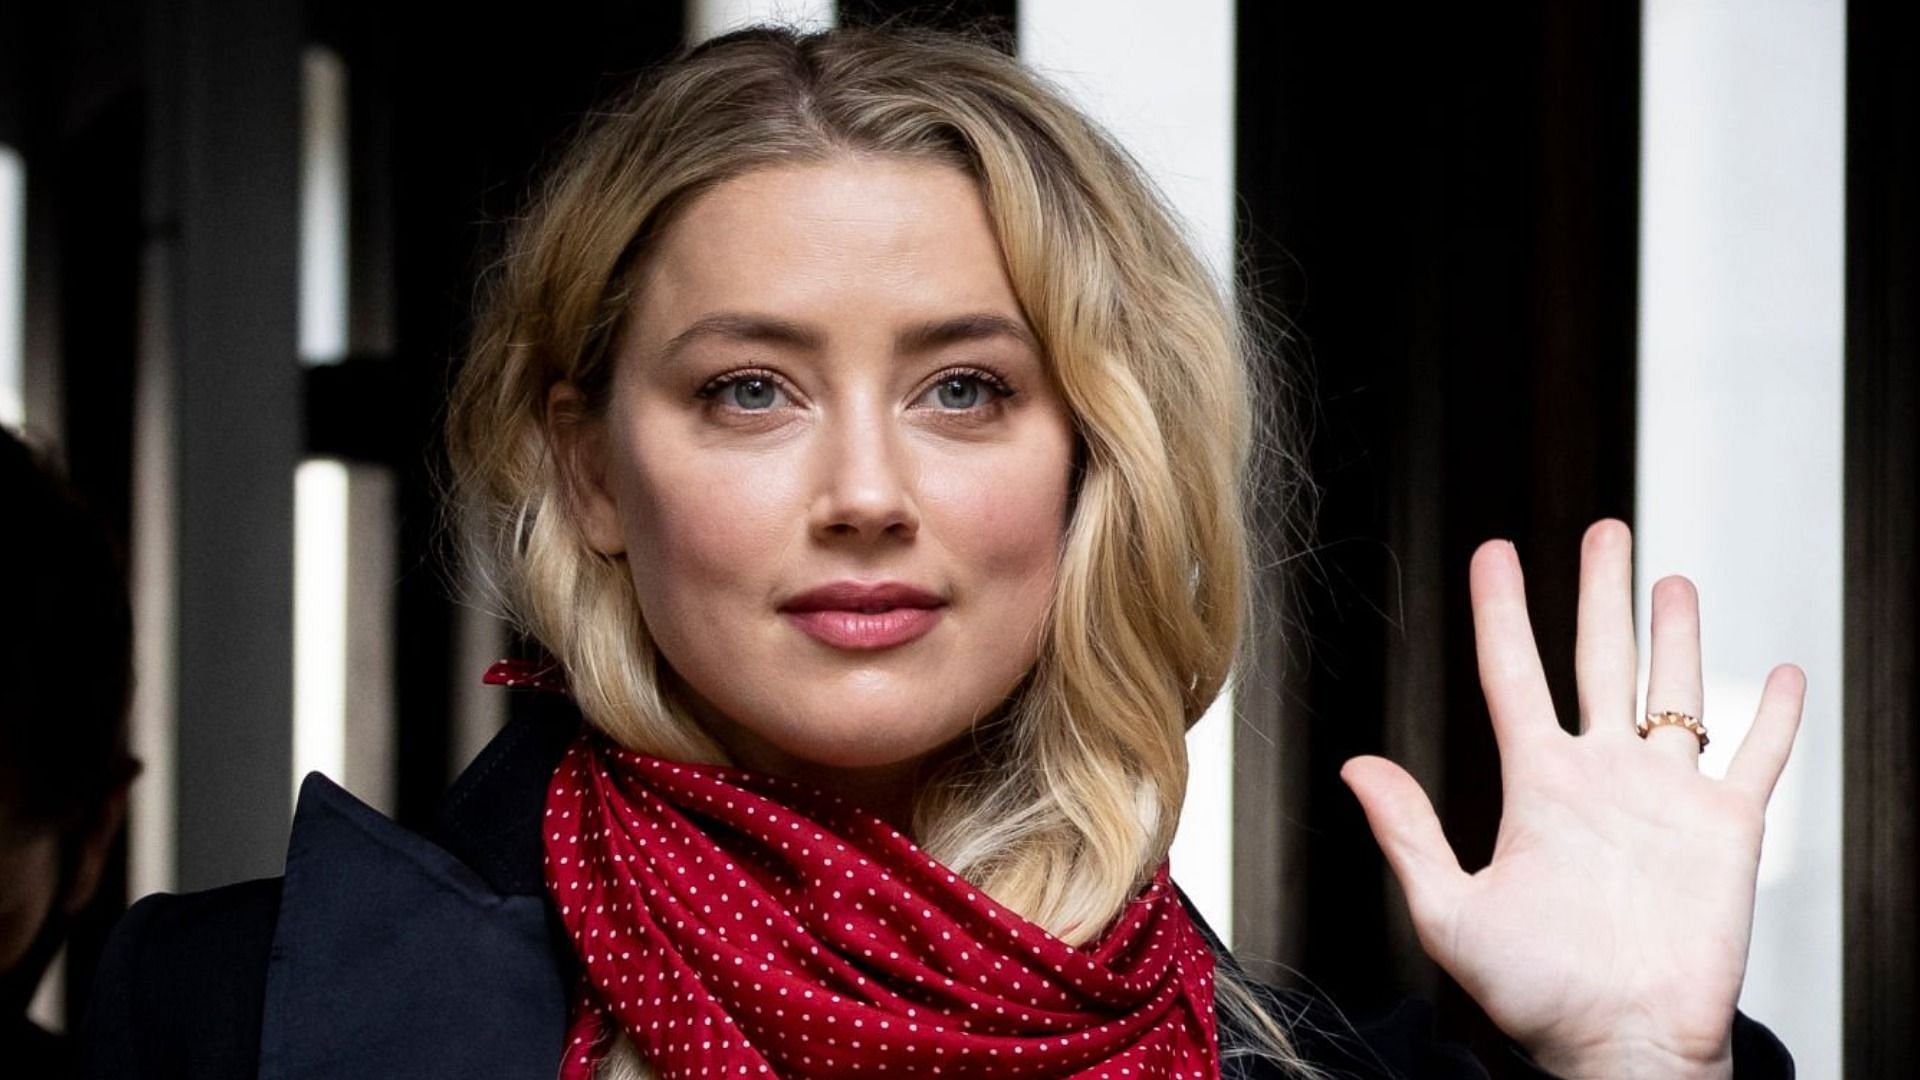 Amber Heard is likely to testify in court next week (Image via Getty Images)